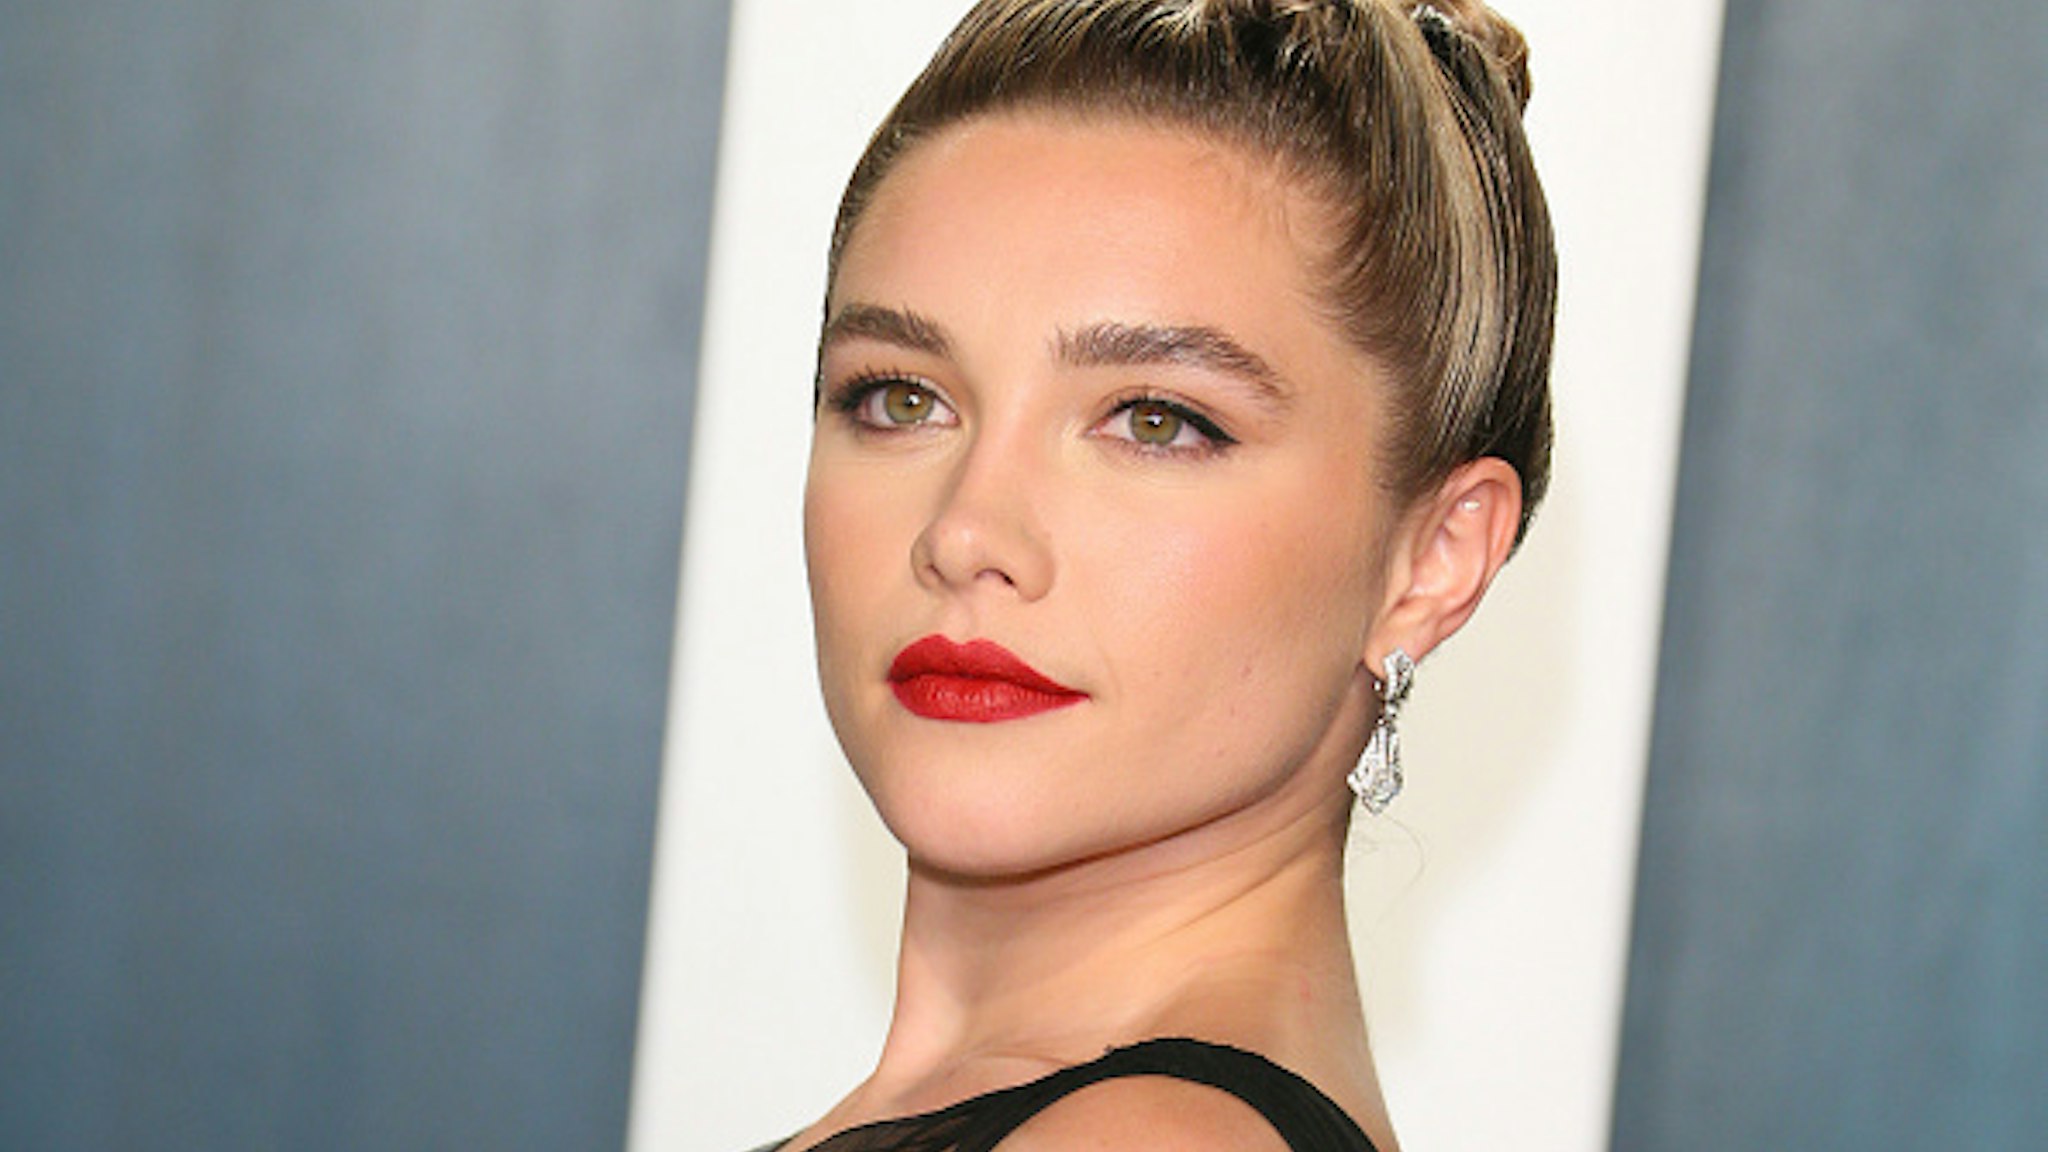 British actress Florence Pugh attends the 2020 Vanity Fair Oscar Party following the 92nd Oscars at The Wallis Annenberg Center for the Performing Arts in Beverly Hills on February 9, 2020.